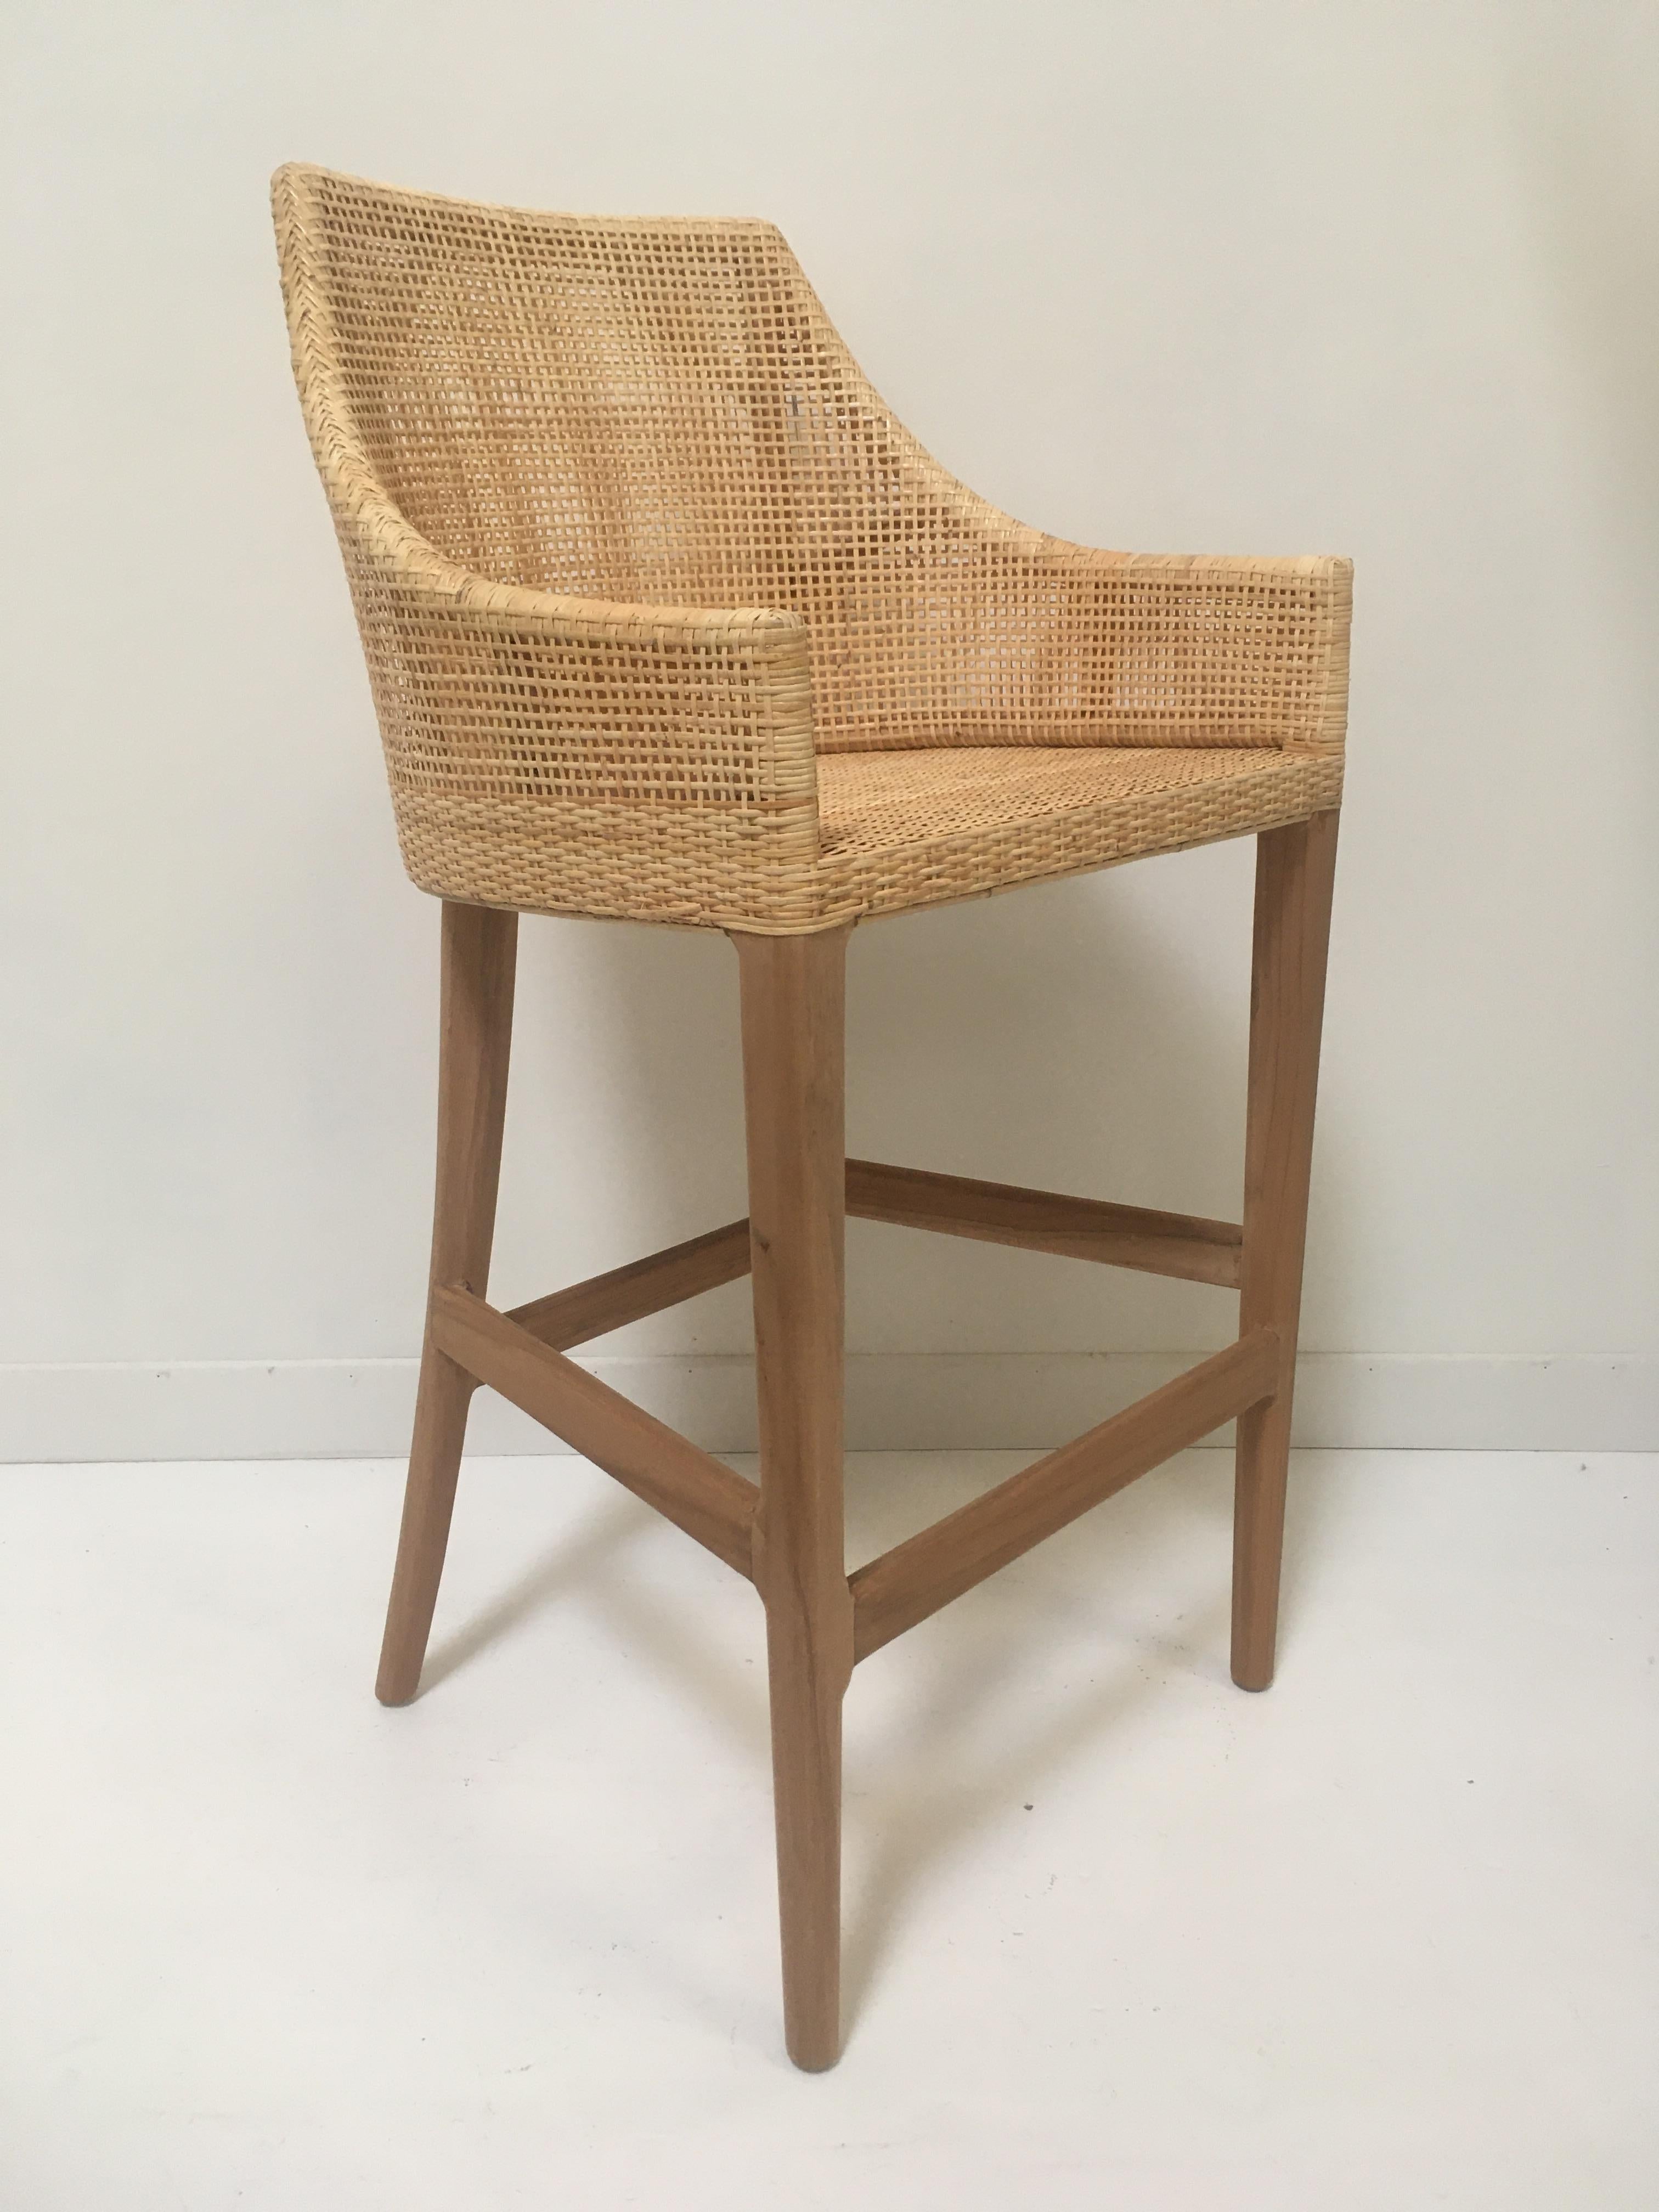 Teak Wooden and Rattan Bar Stool In New Condition For Sale In Tourcoing, FR